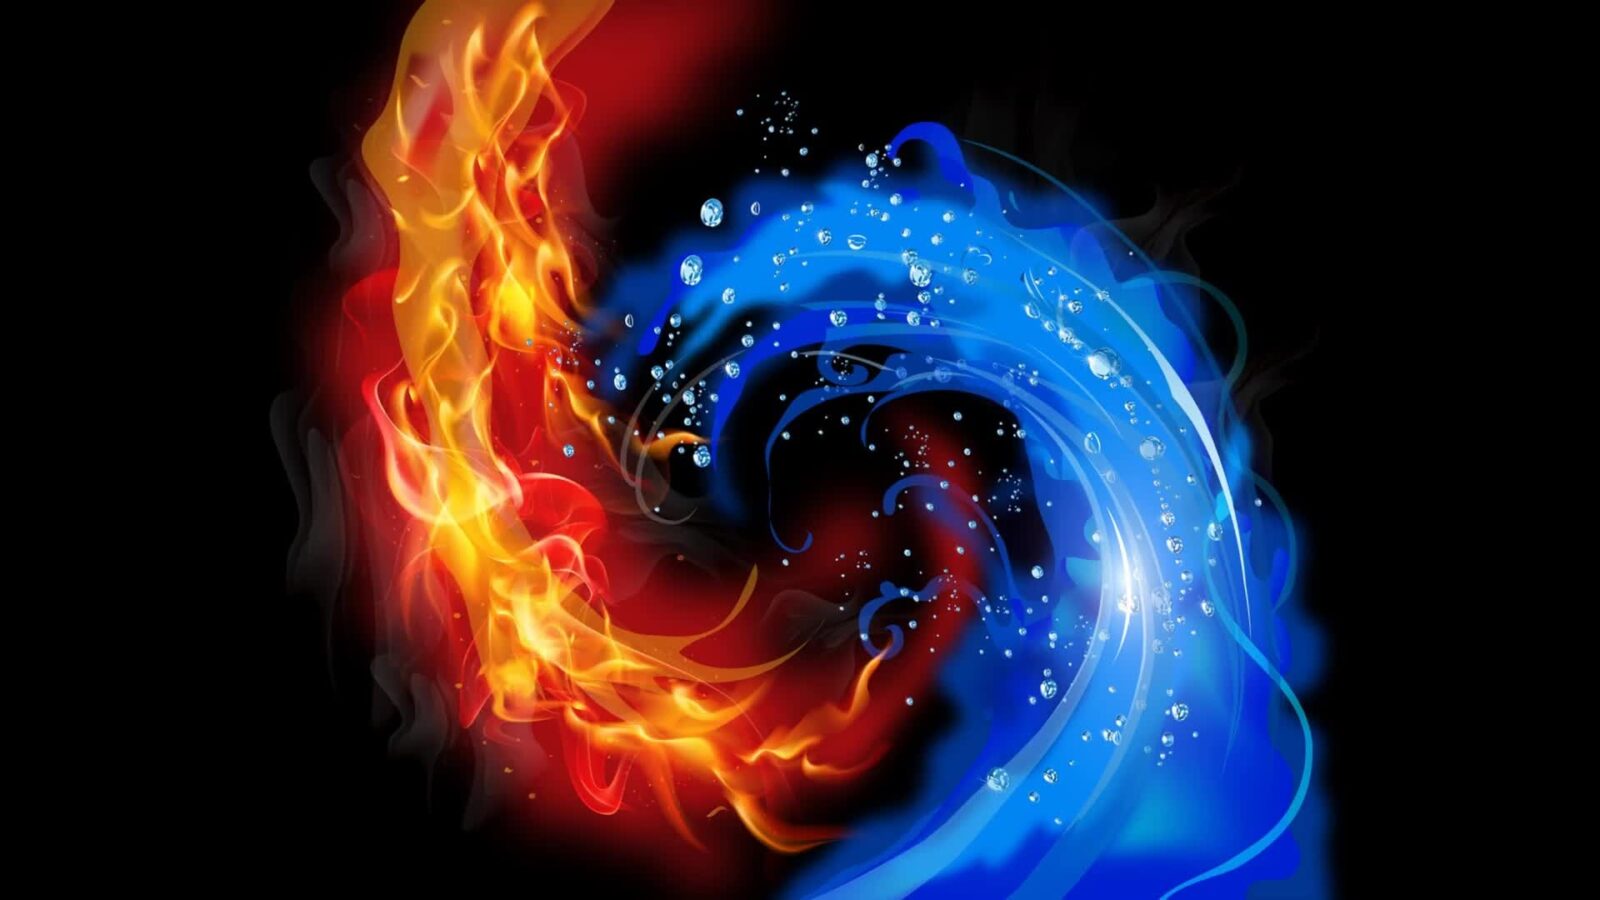 LiveWallpapers4Free.com | Water And Flame Fantasy Background - Free Live Wallpaper